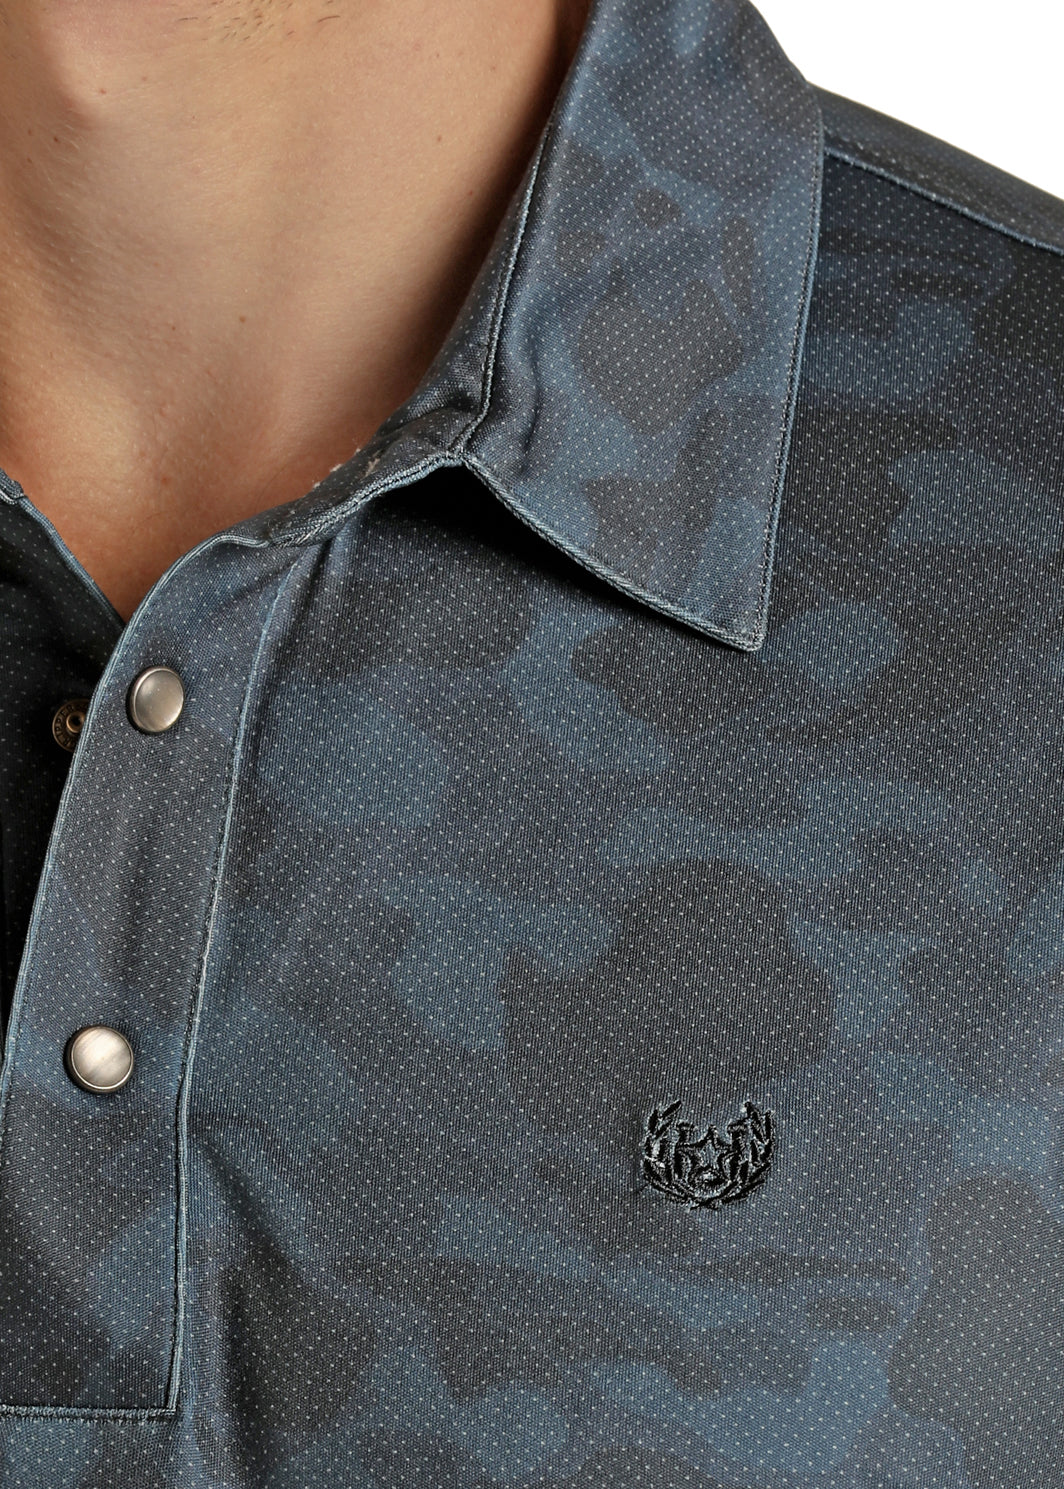 Panhandle PPMT51R0WD Navy Camo Snap Polo